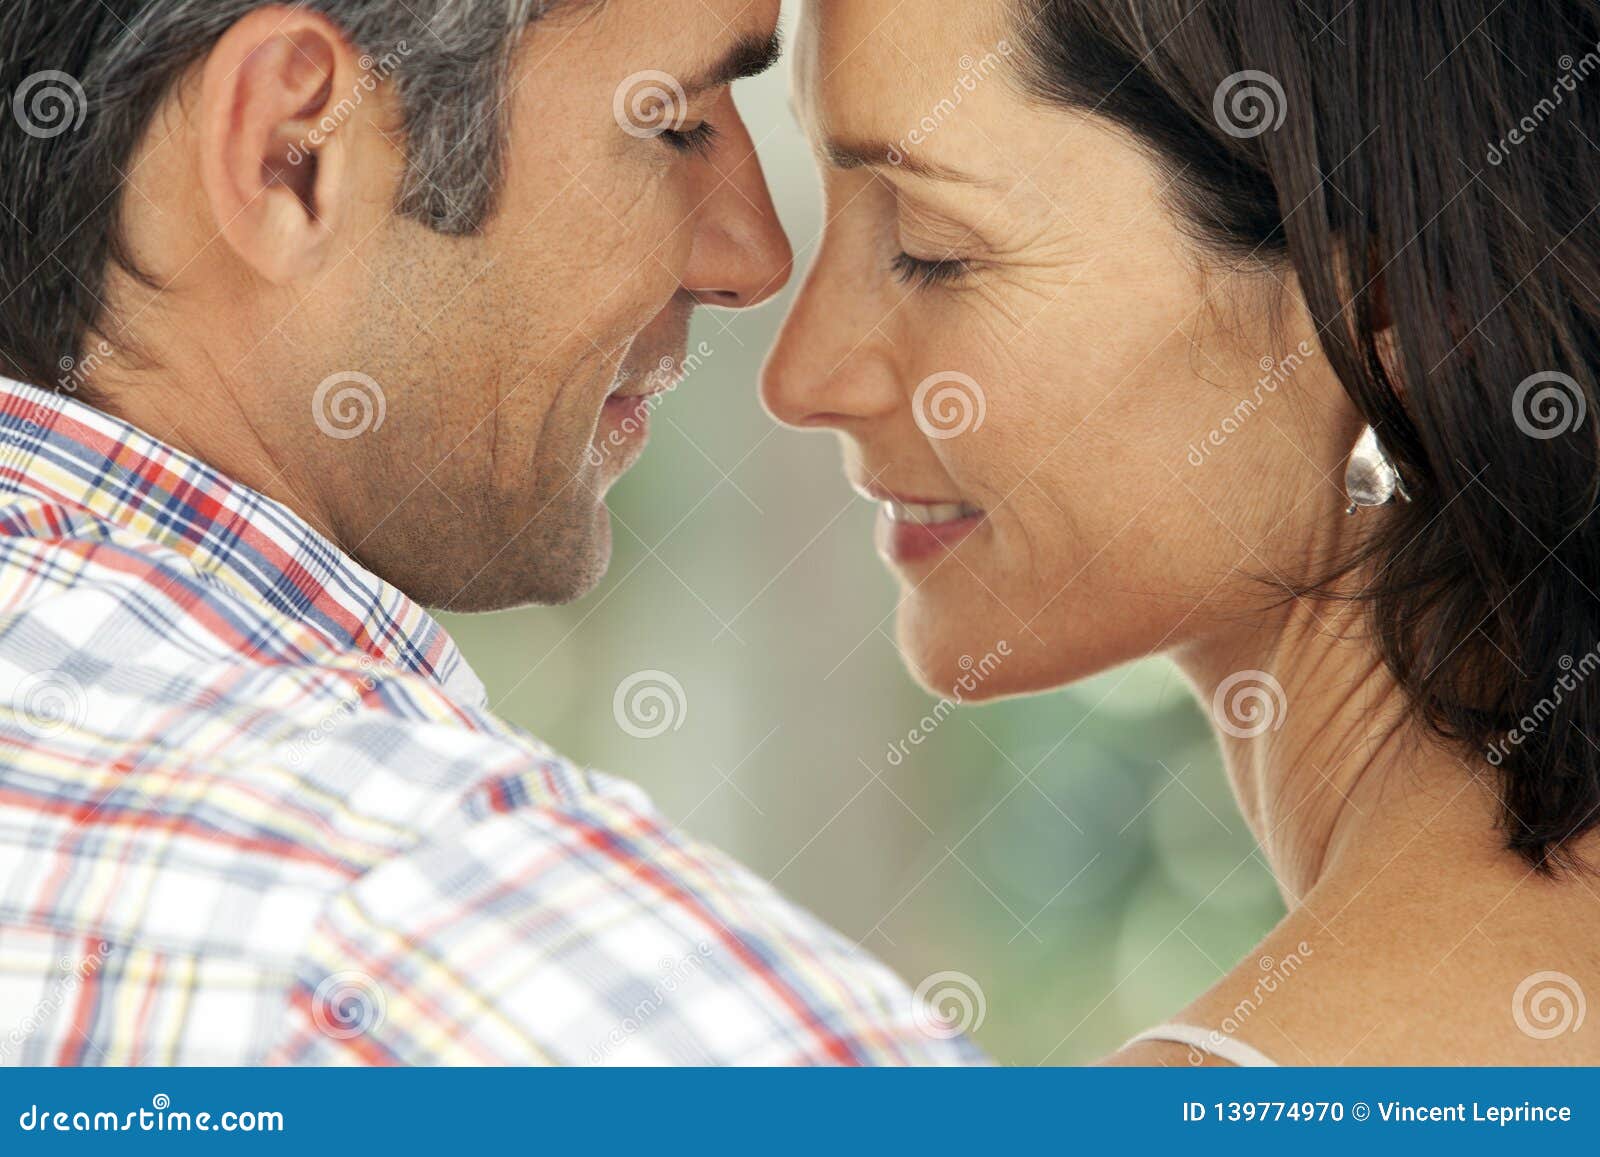 couple in love - moment of intimacy between middle aged man and woman